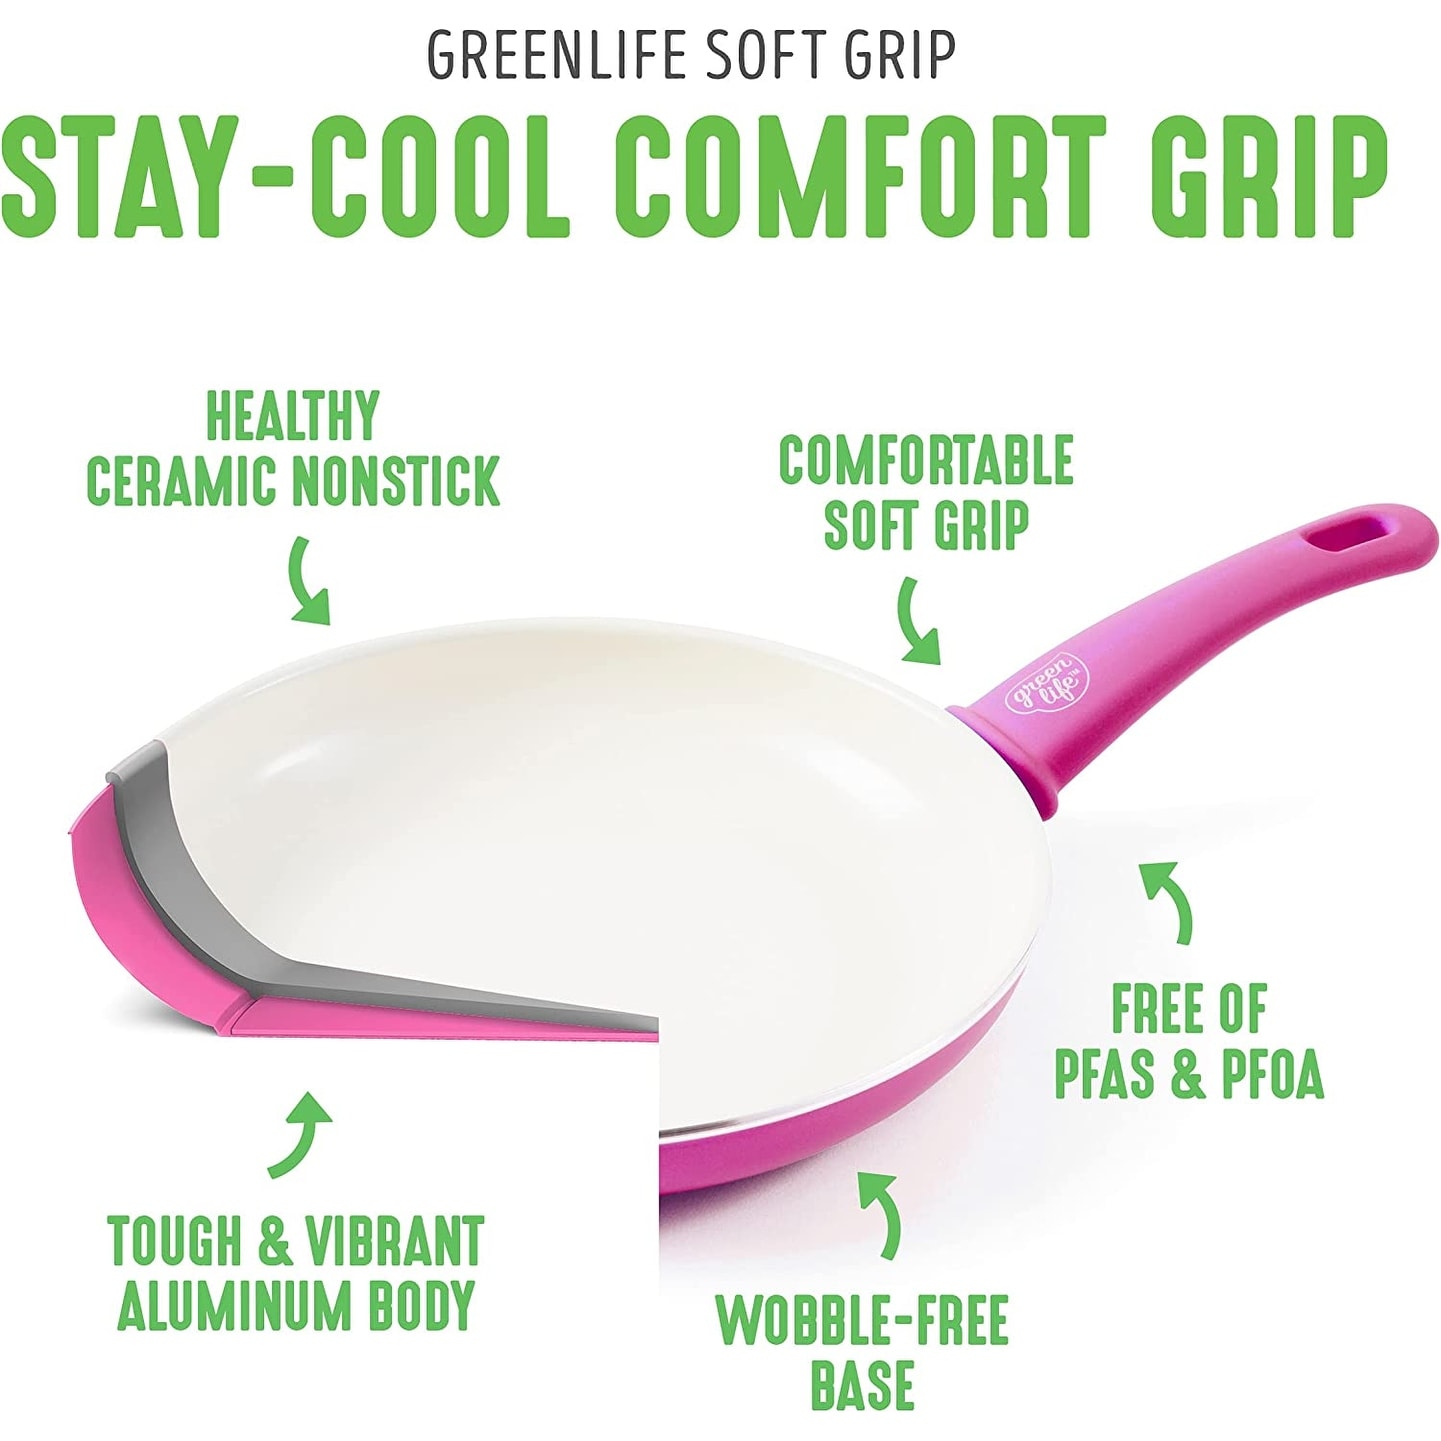 https://ak1.ostkcdn.com/images/products/is/images/direct/bb1c3aed1f9cc1bce4040c531f8dc17f1ab6e345/GreenLife-Soft-Grip-Healthy-Ceramic-Nonstick%2C-16-Piece-Cookware-Pots-and-Pans-Set%2C-PFAS-Free%2C-Dishwasher-Safe%2C-Caribbean-Blue.jpg